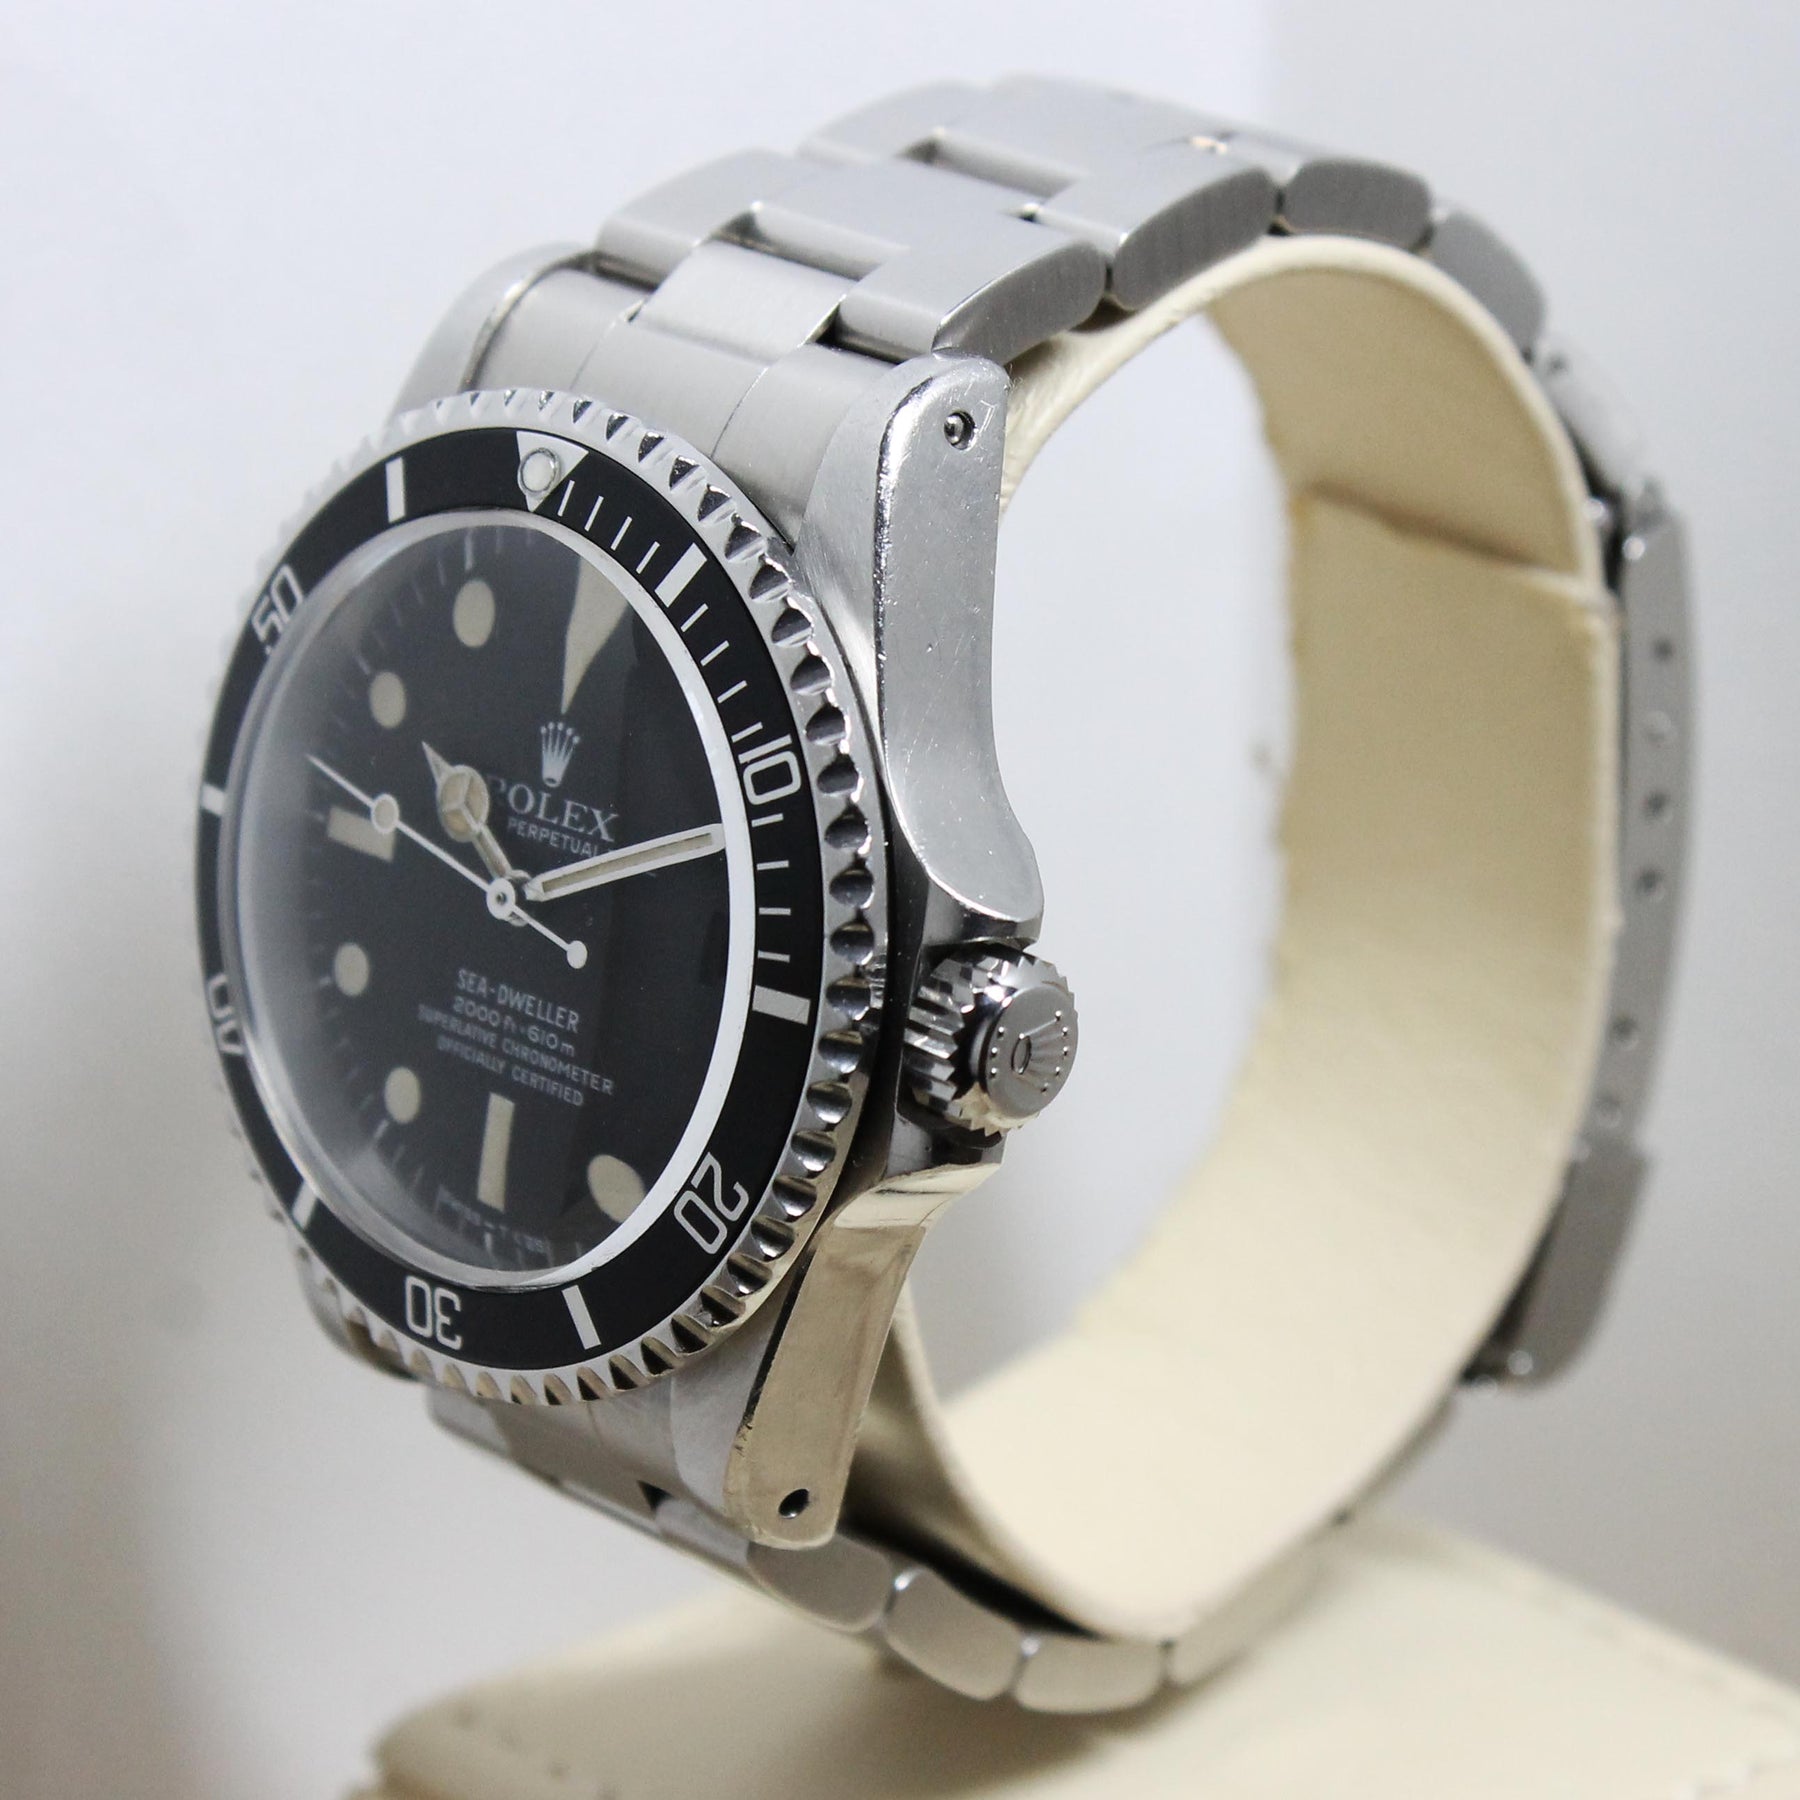 Rolex Sea Dweller Great White MK1 Ref. 1665 Year 1980 (with Box and Papers)